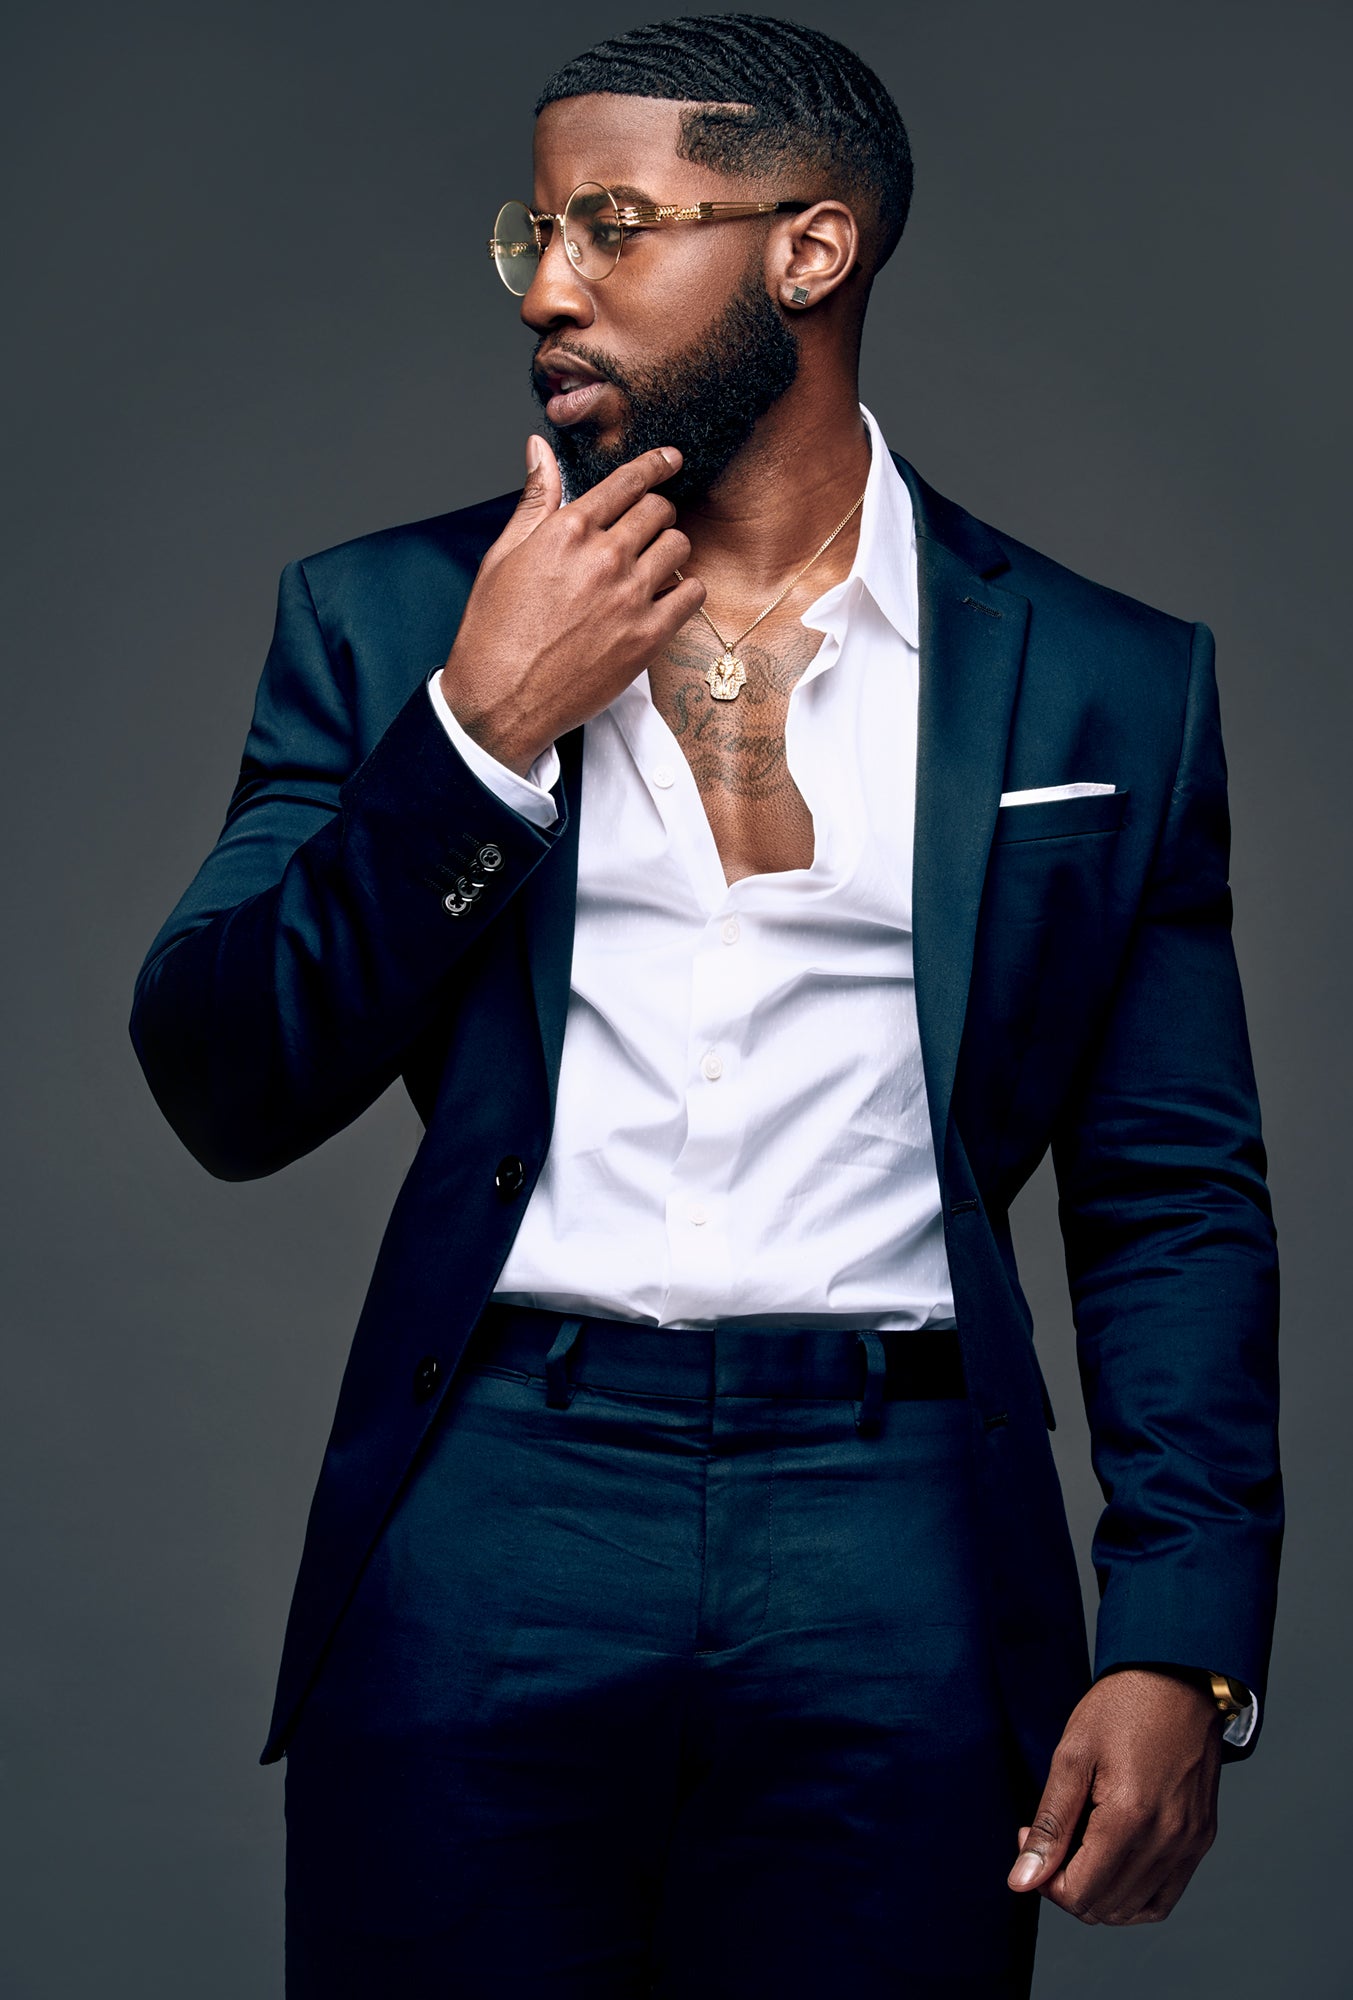 It's Man Crush Monday, and Philly Model Zaire Is Our Gift To You (You're Welcome!)
